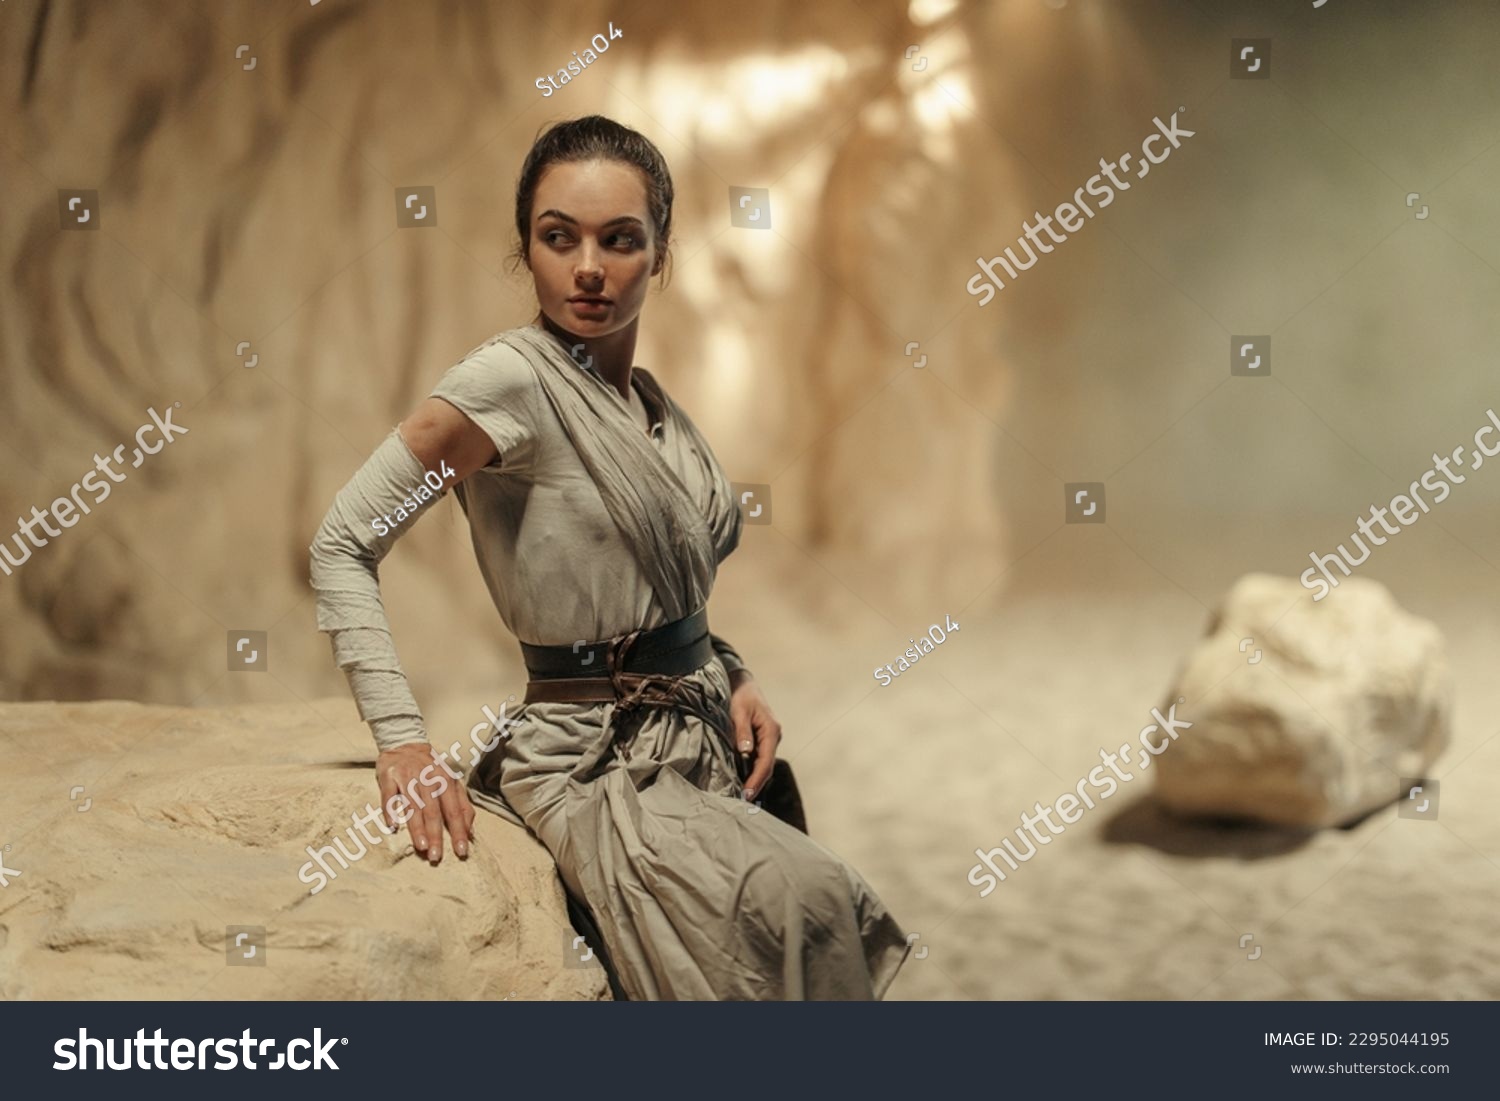 artak harutyunyan recommends Picture Of Rey From Star Wars